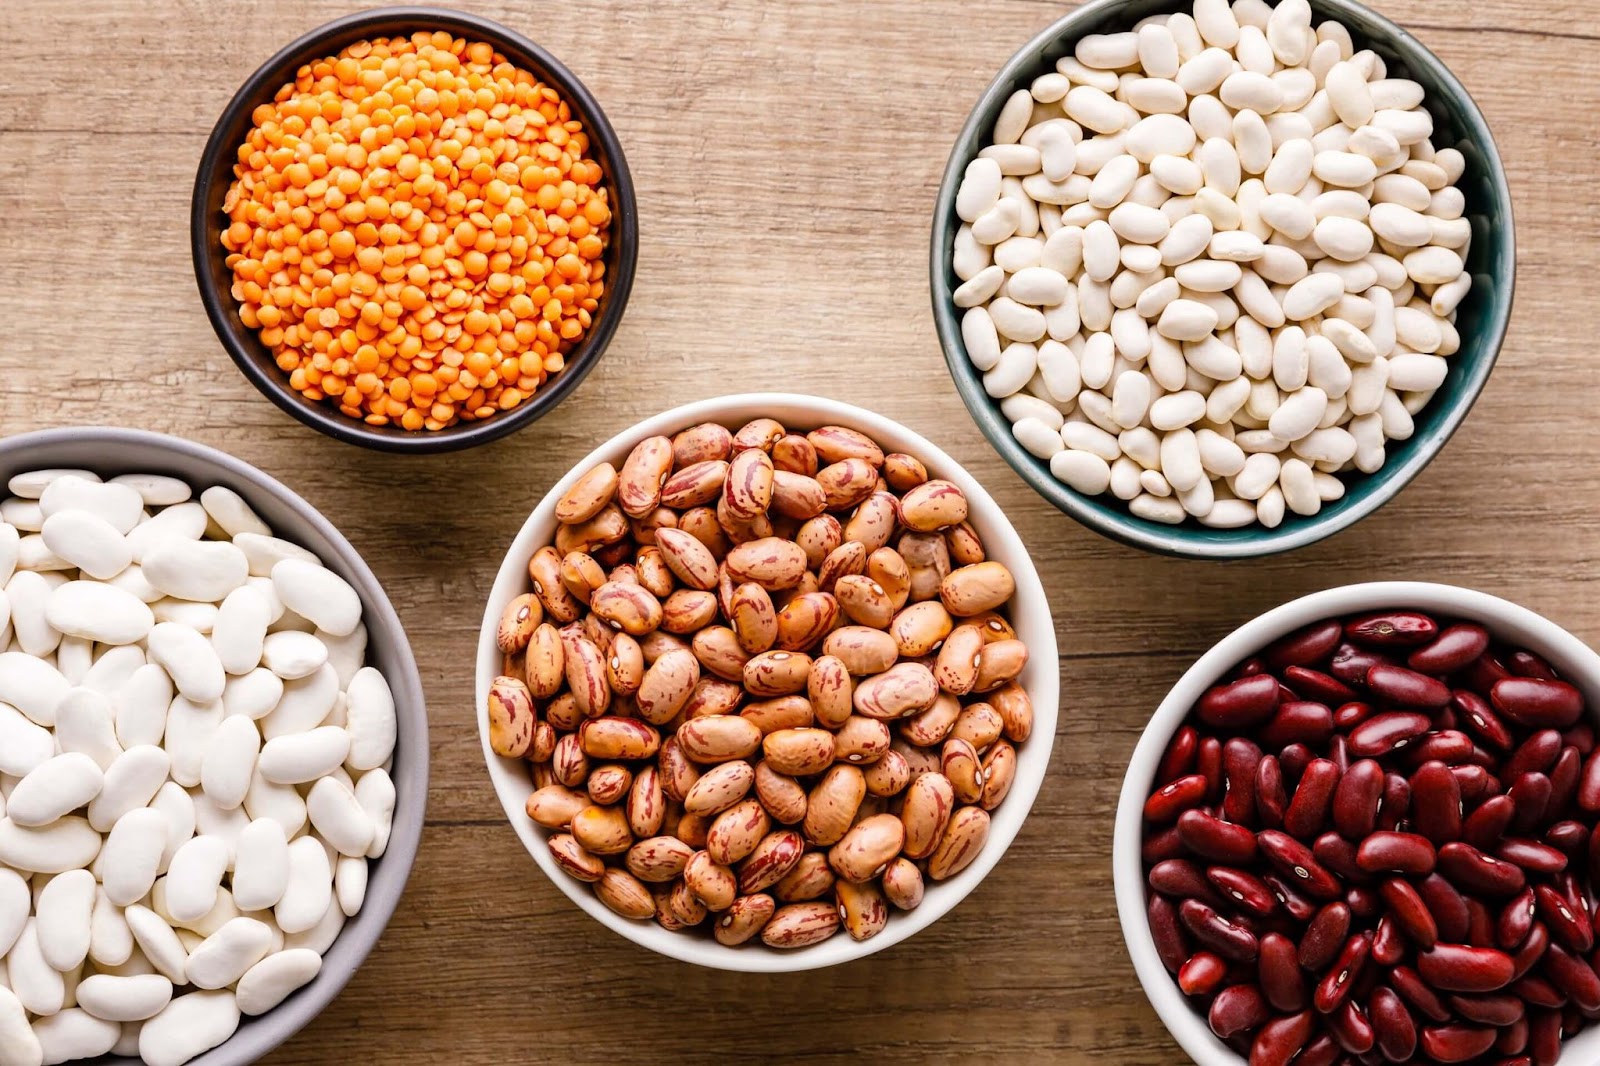 Are Beans A Protein Or Carb? - Niyis.co.uk